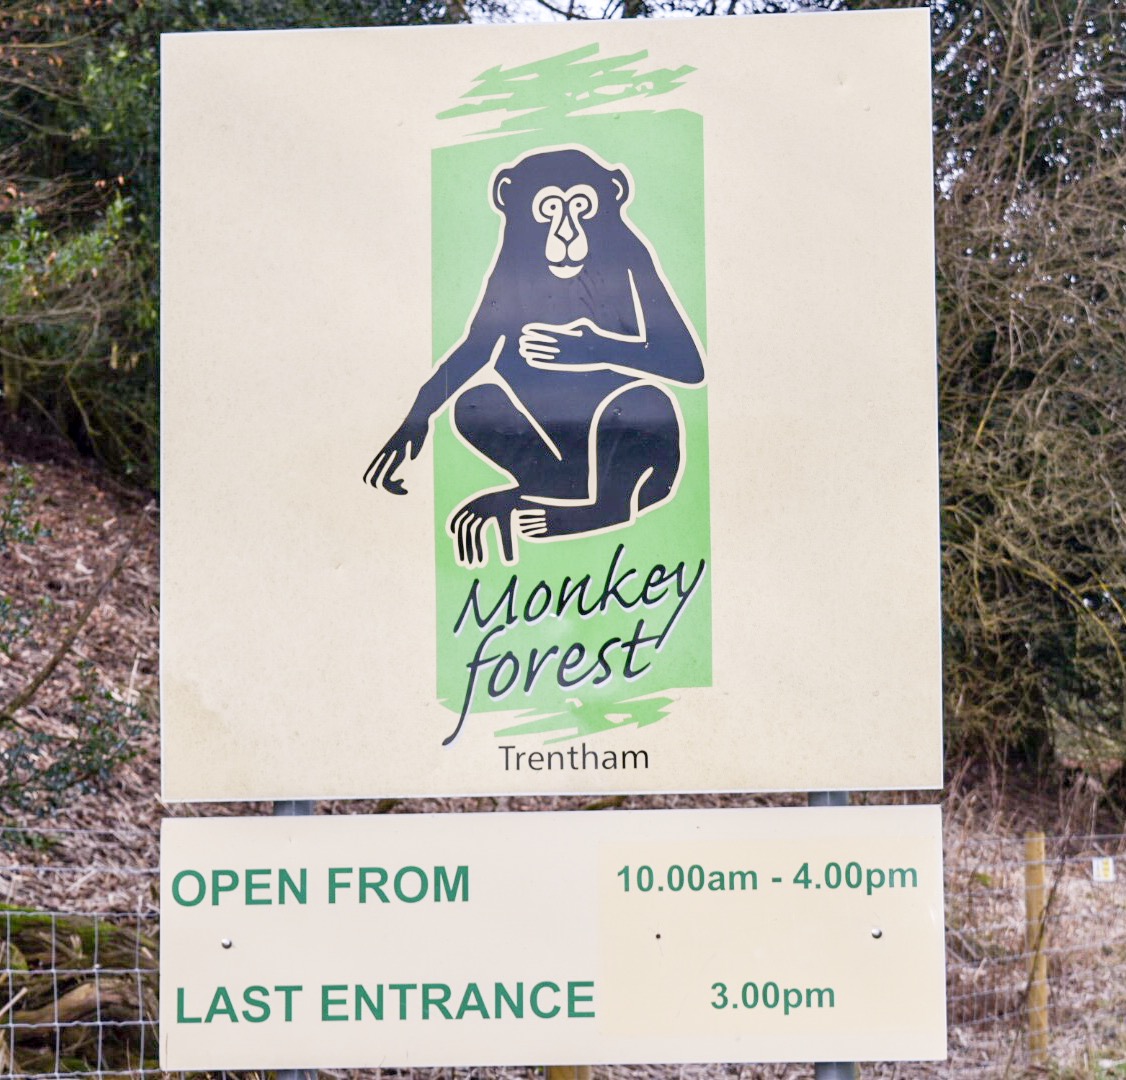 Trentham Monkey Forest review